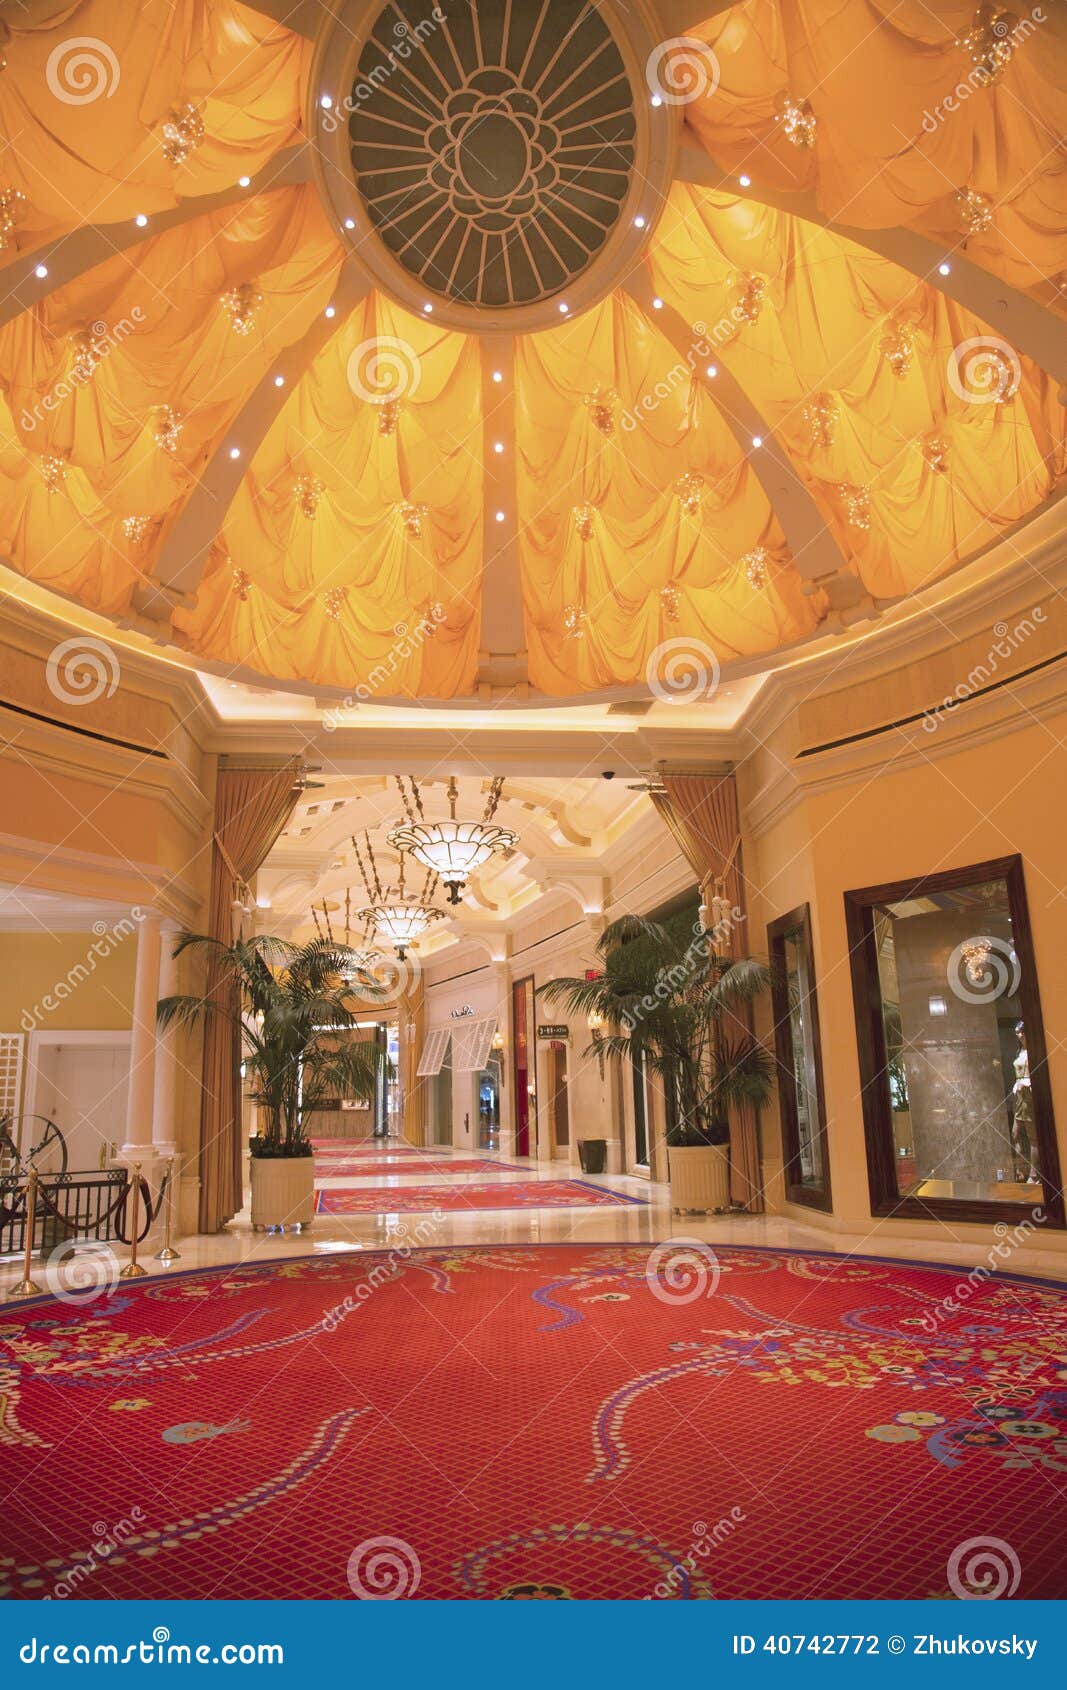 Louis Vuitton Store at the Wynn Esplanade at the Wynn Hotel and